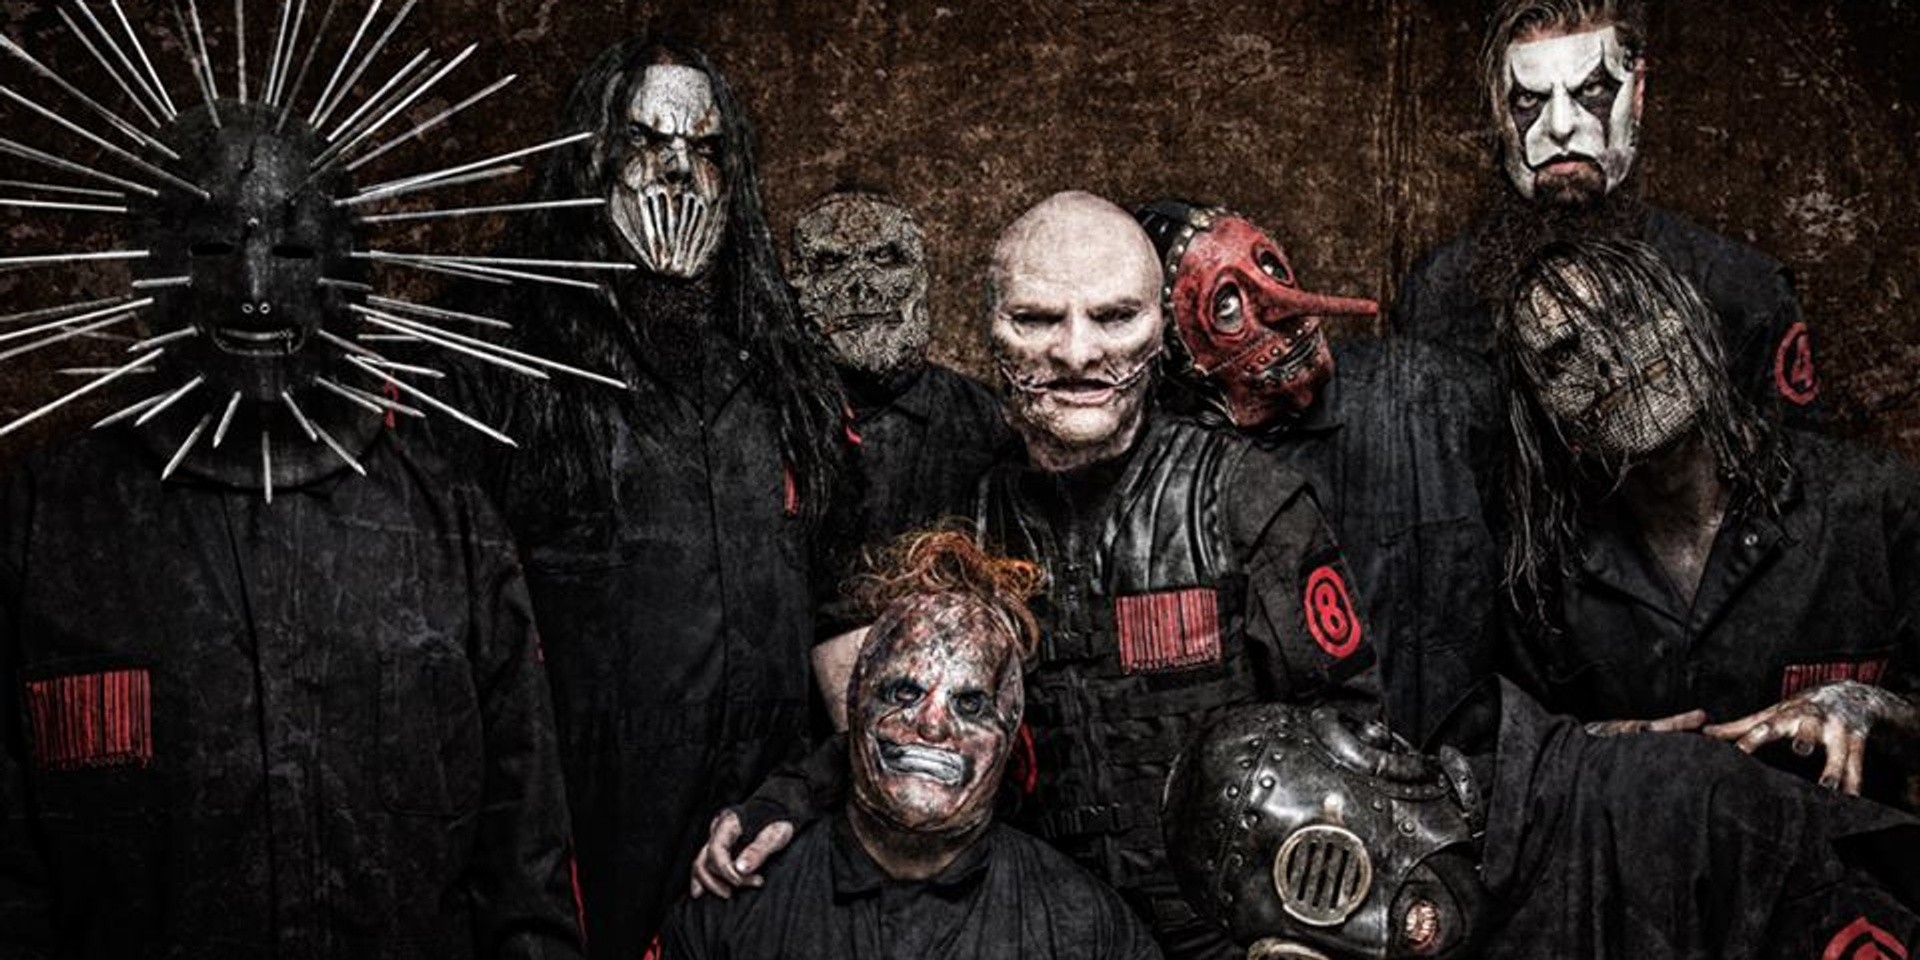 Slipknot is coming to Asia